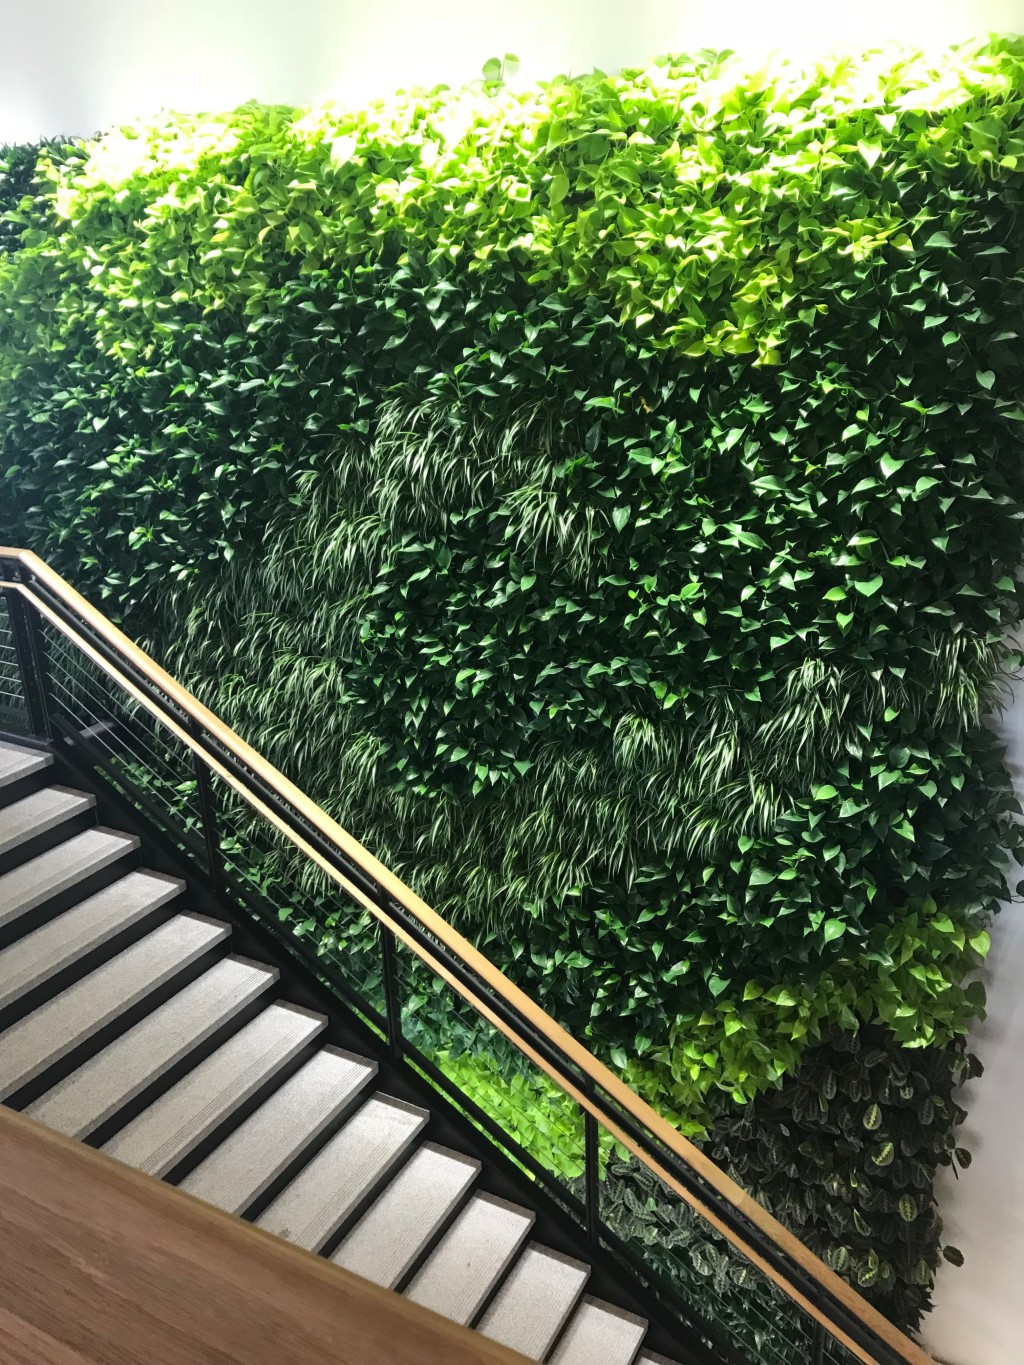 The living green wall is a prominent feature of Ripich Commons